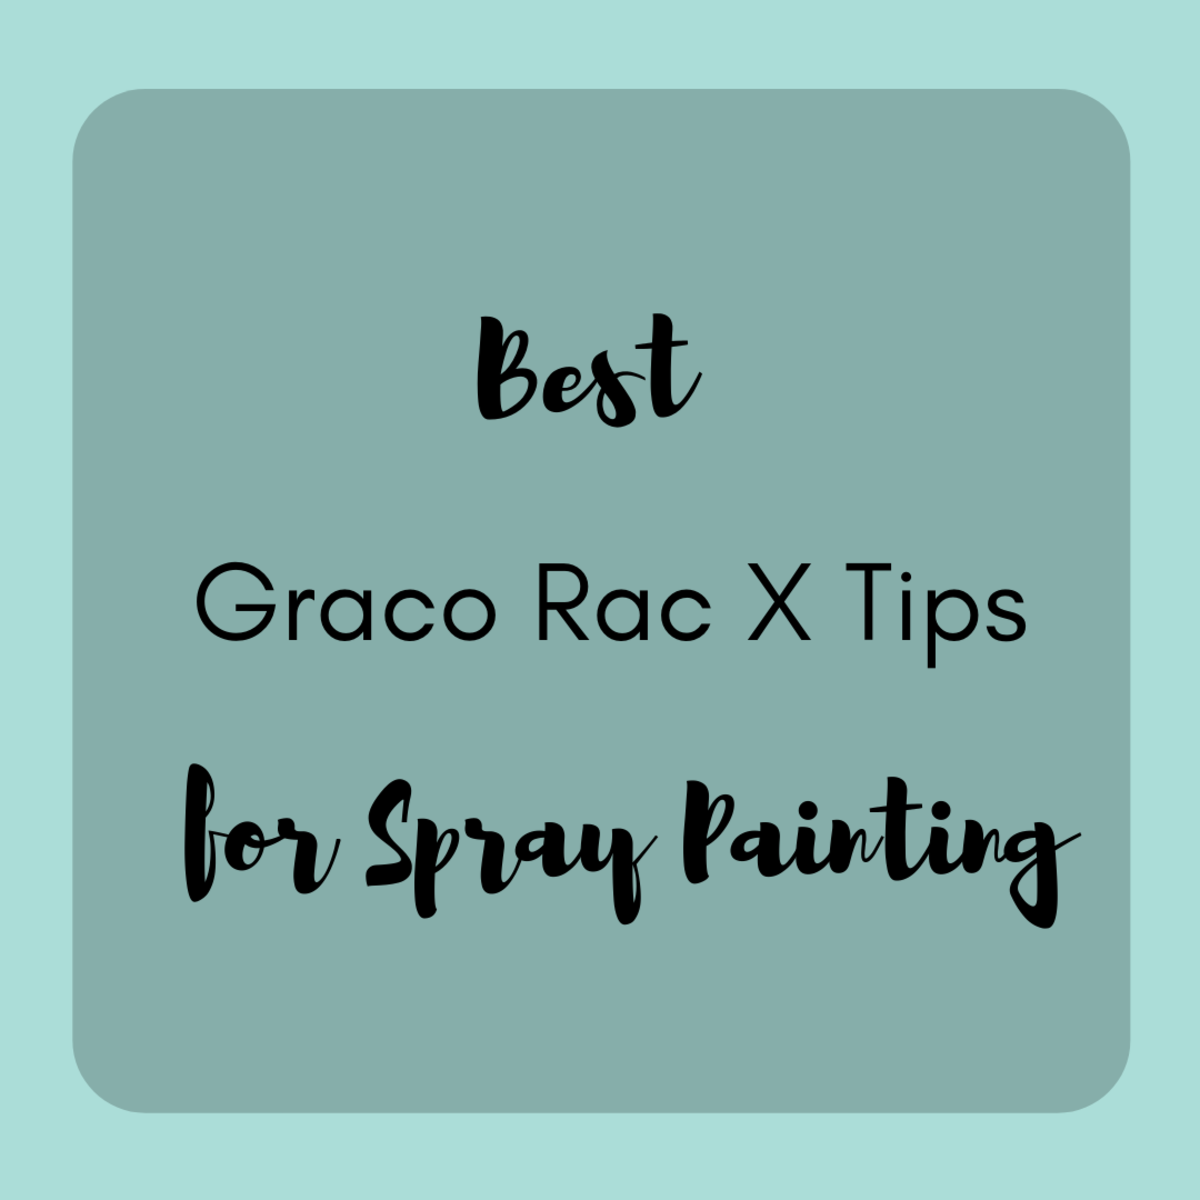 The Best Graco Rac X Tips for Spraying Paint